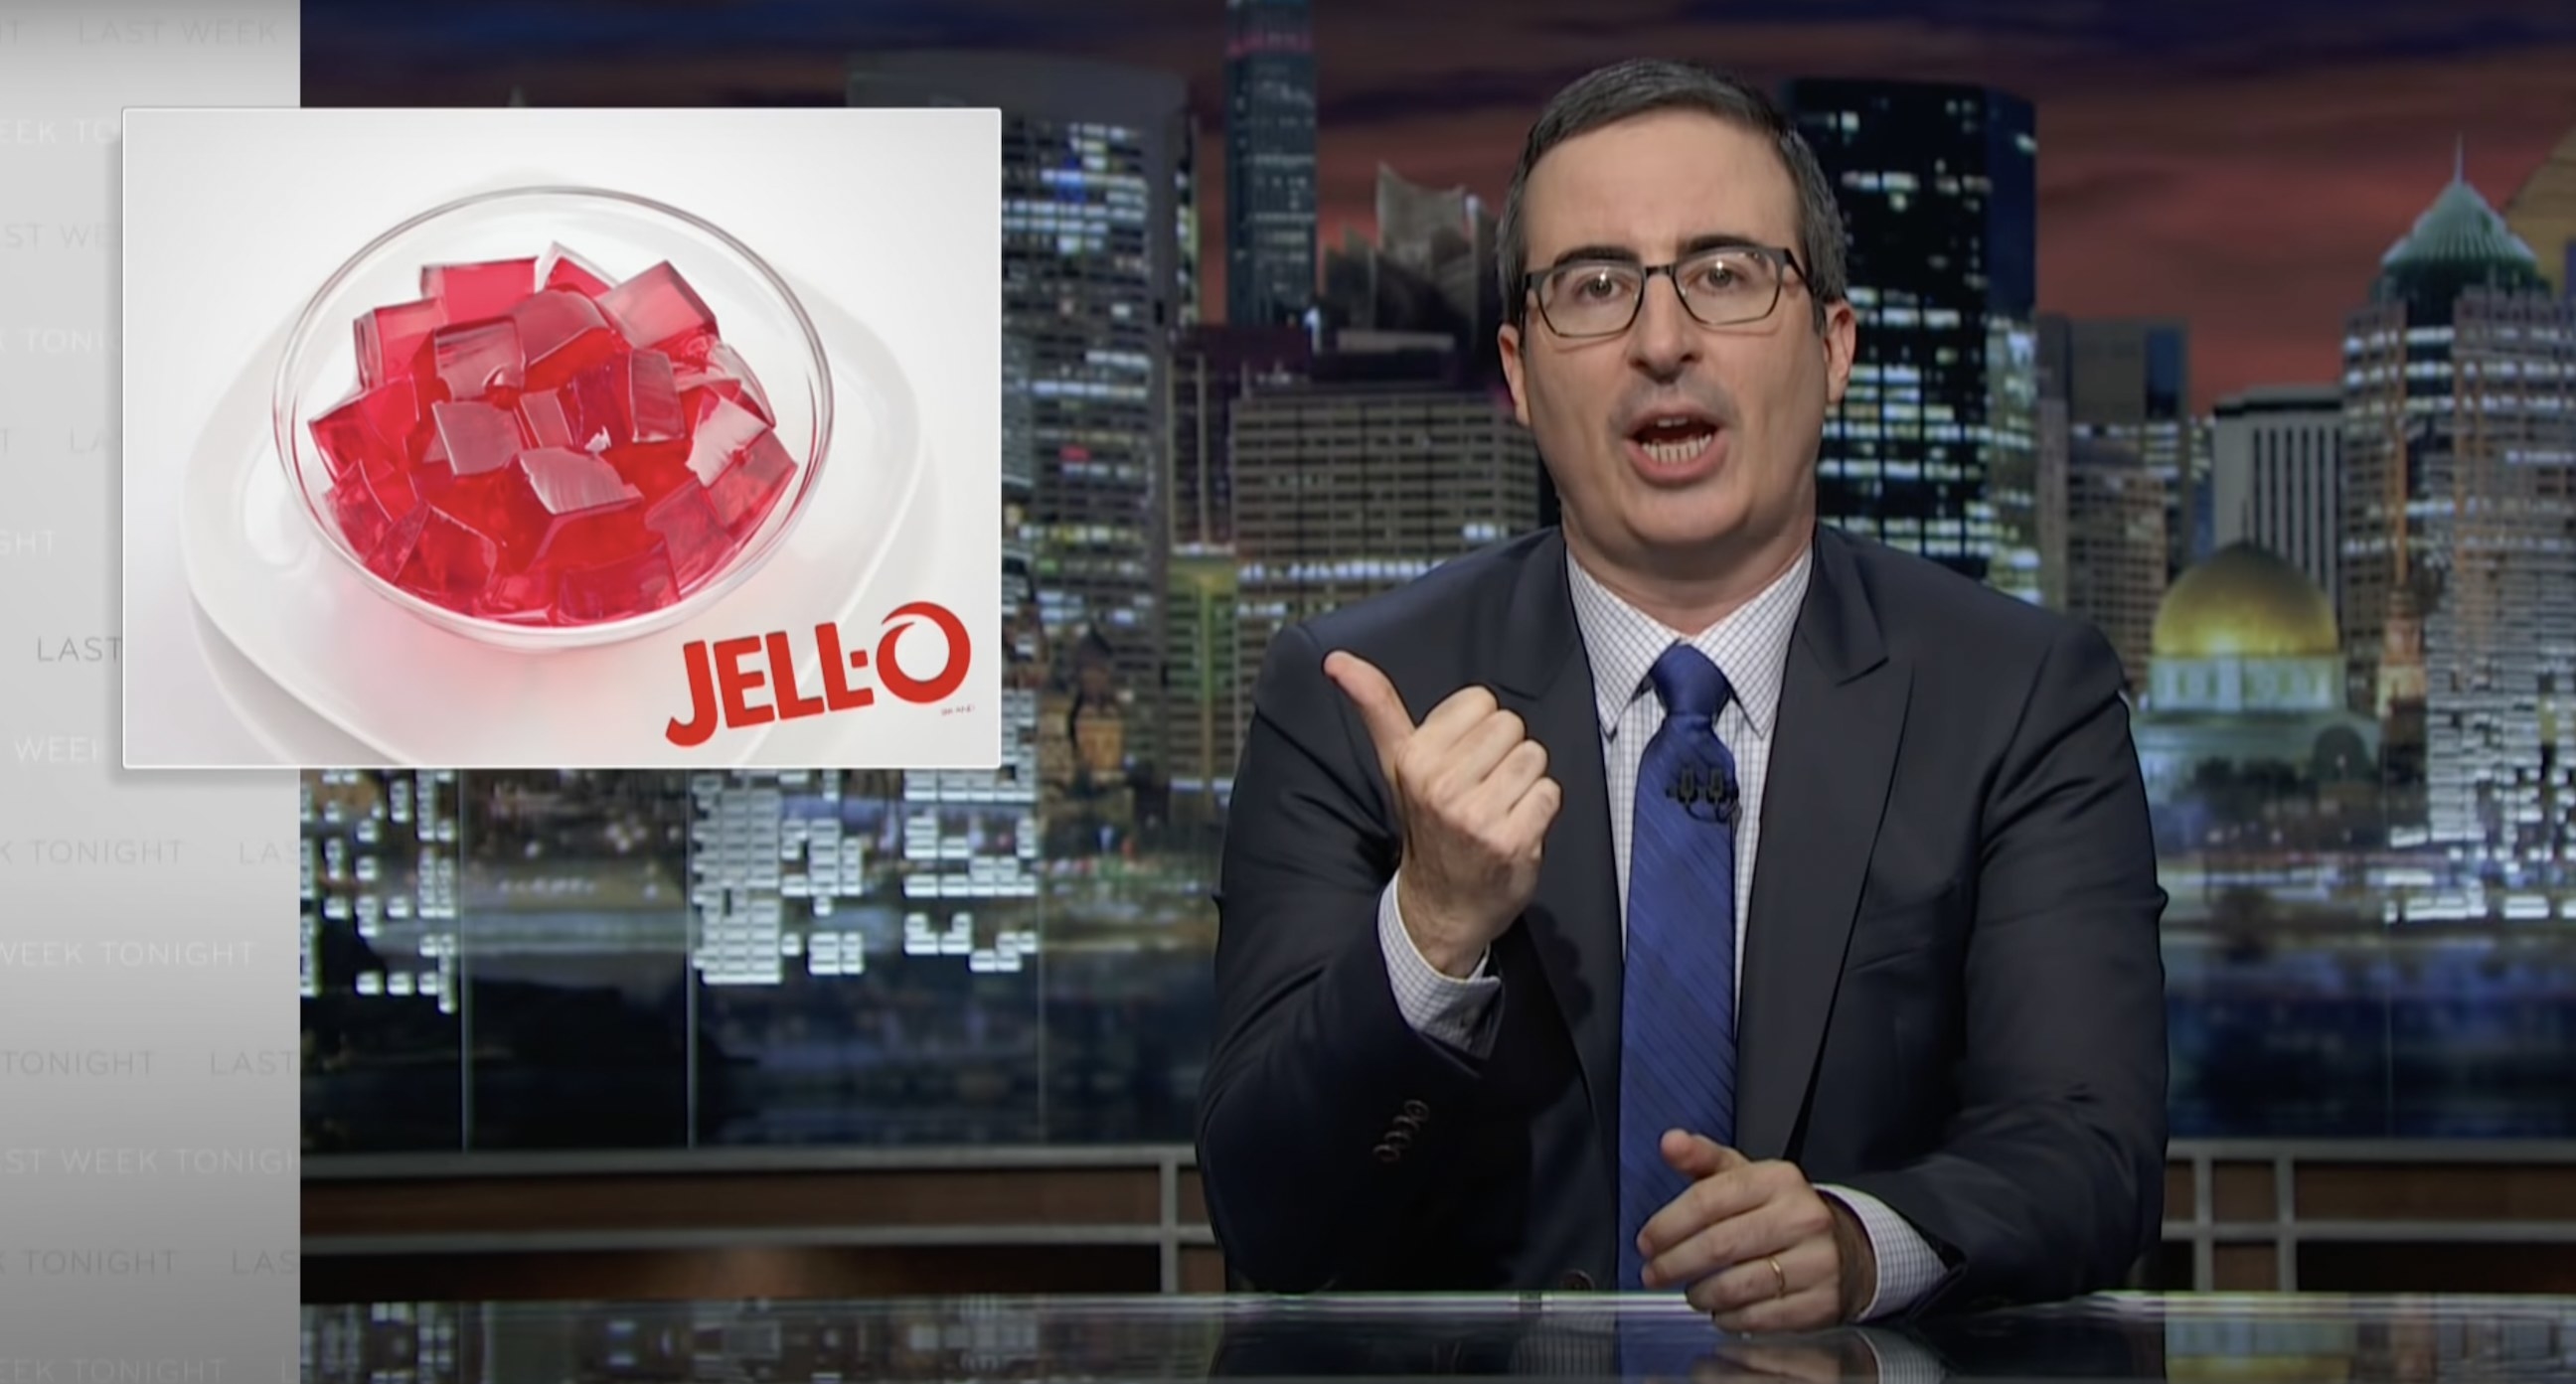 John Oliver at his desk, pointing to an image of Jello next to him